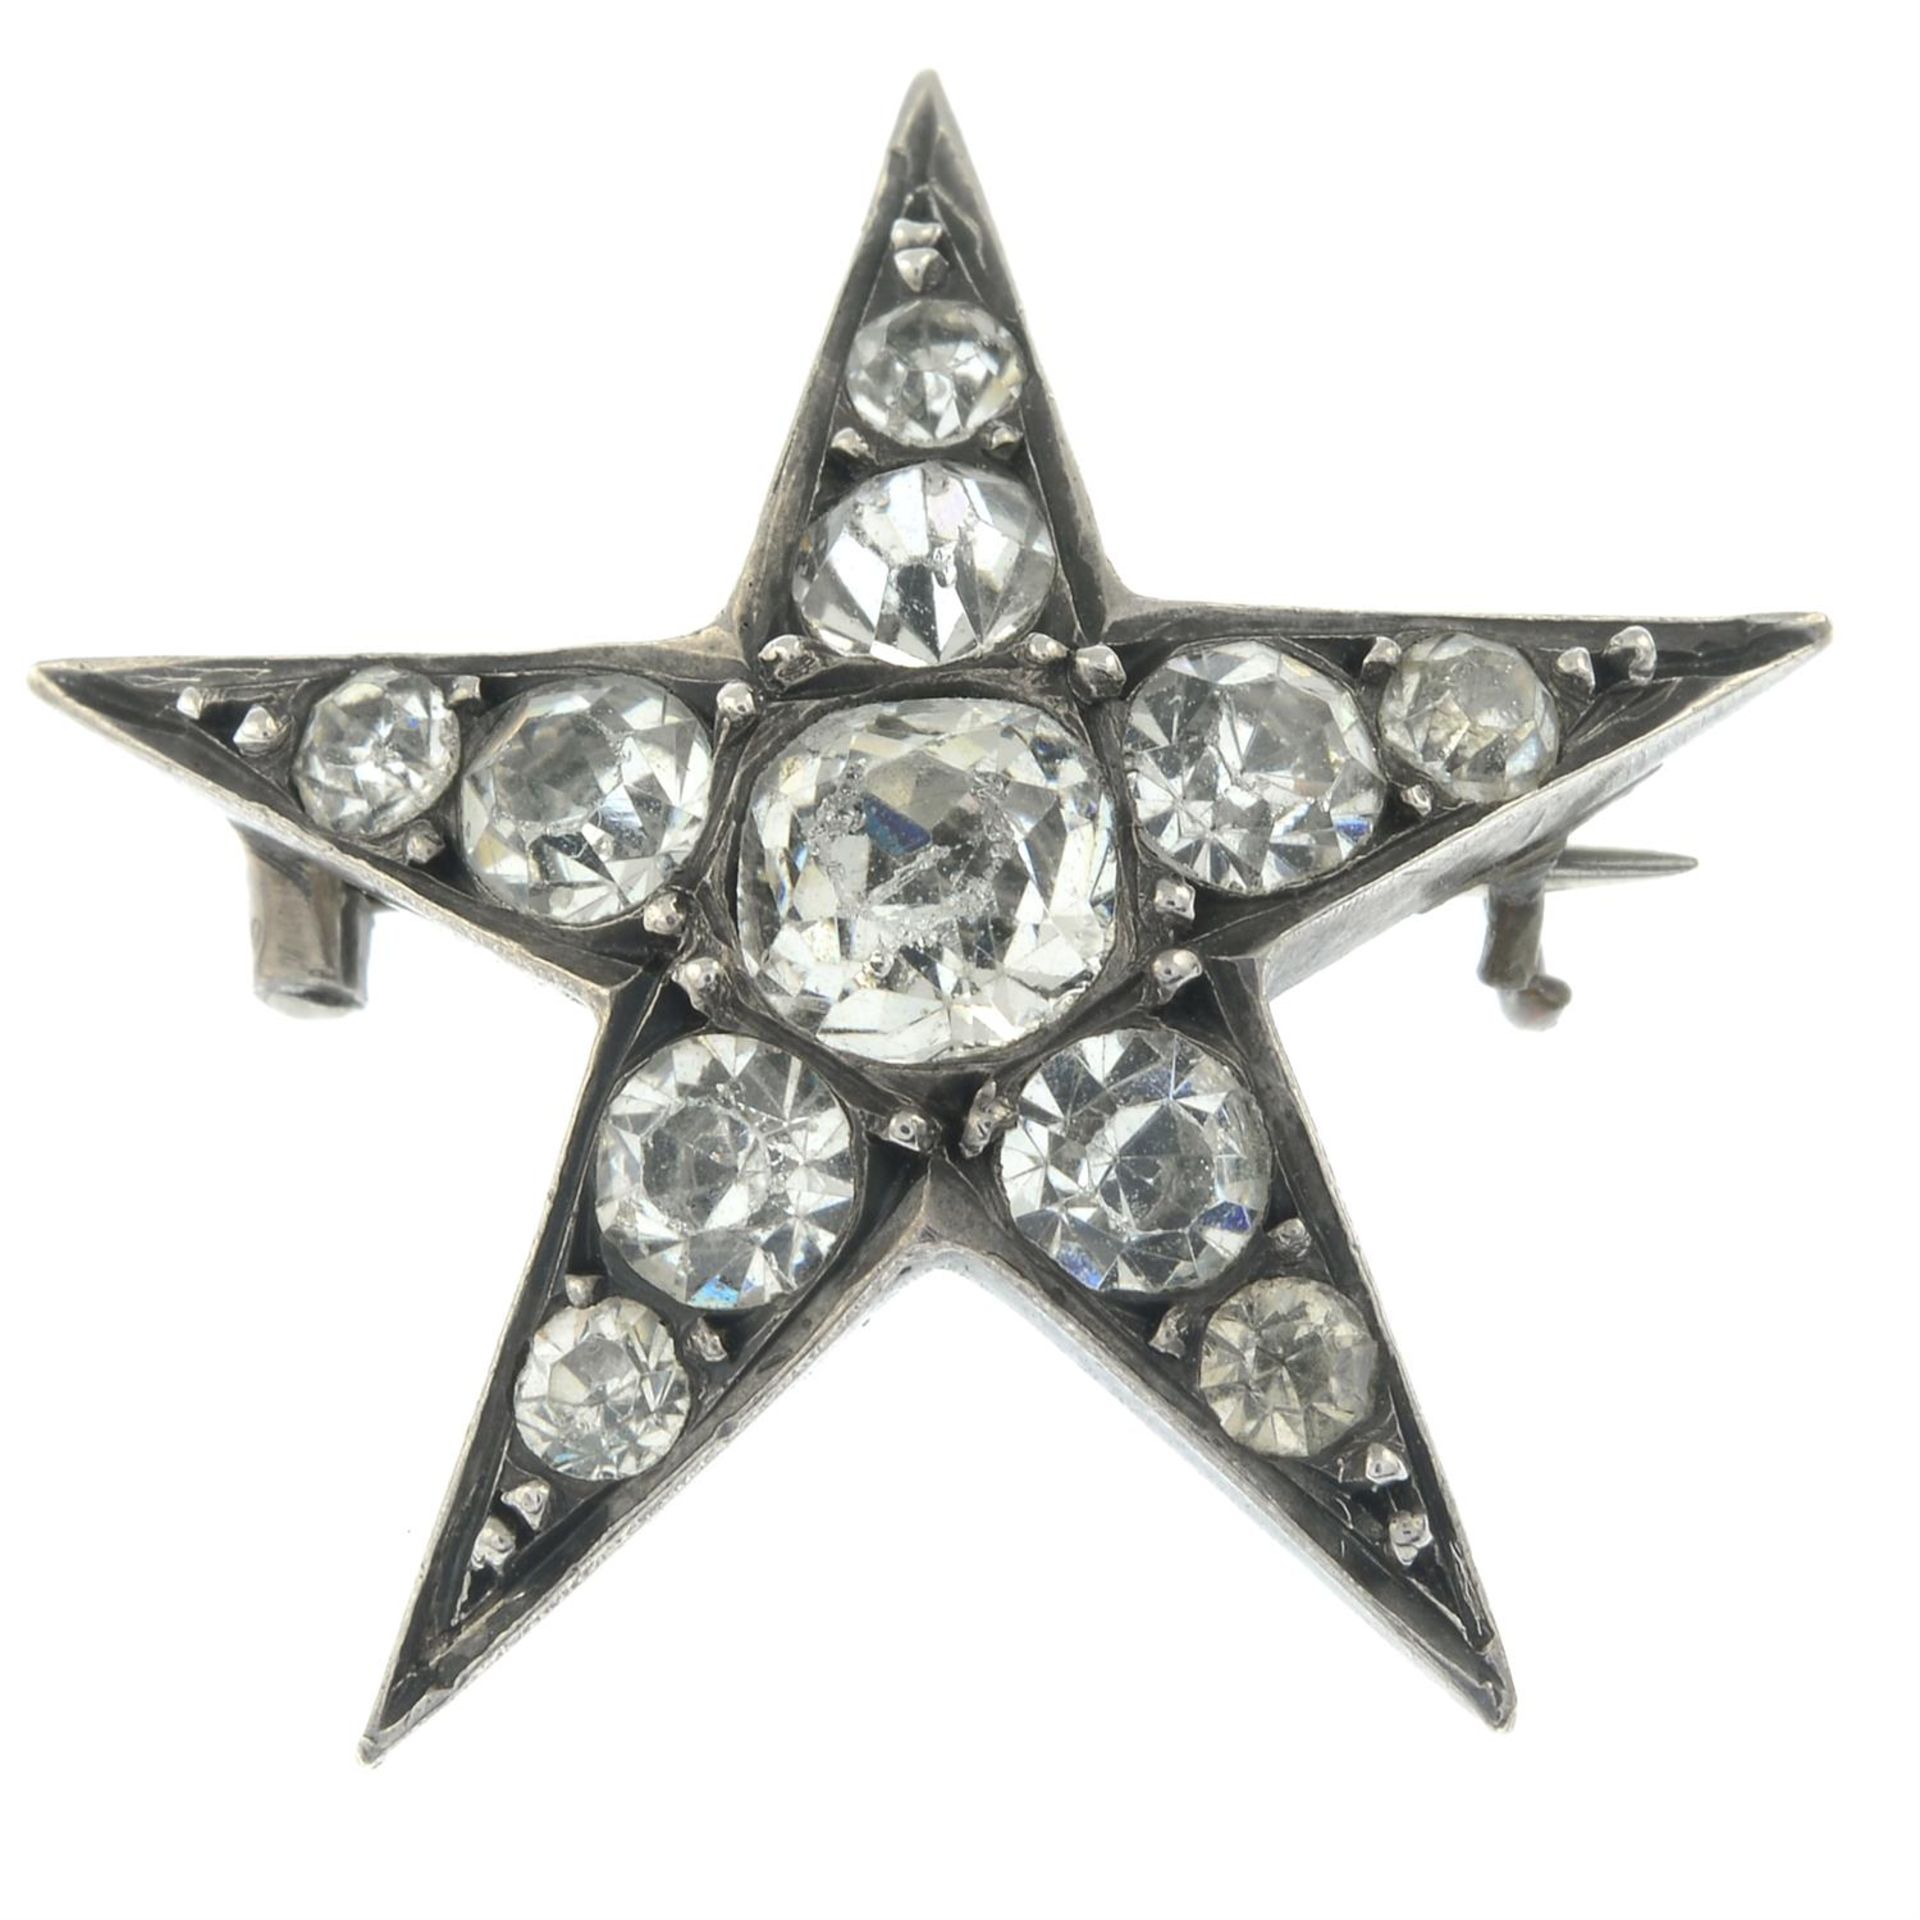 A late 19th century paste star brooch.